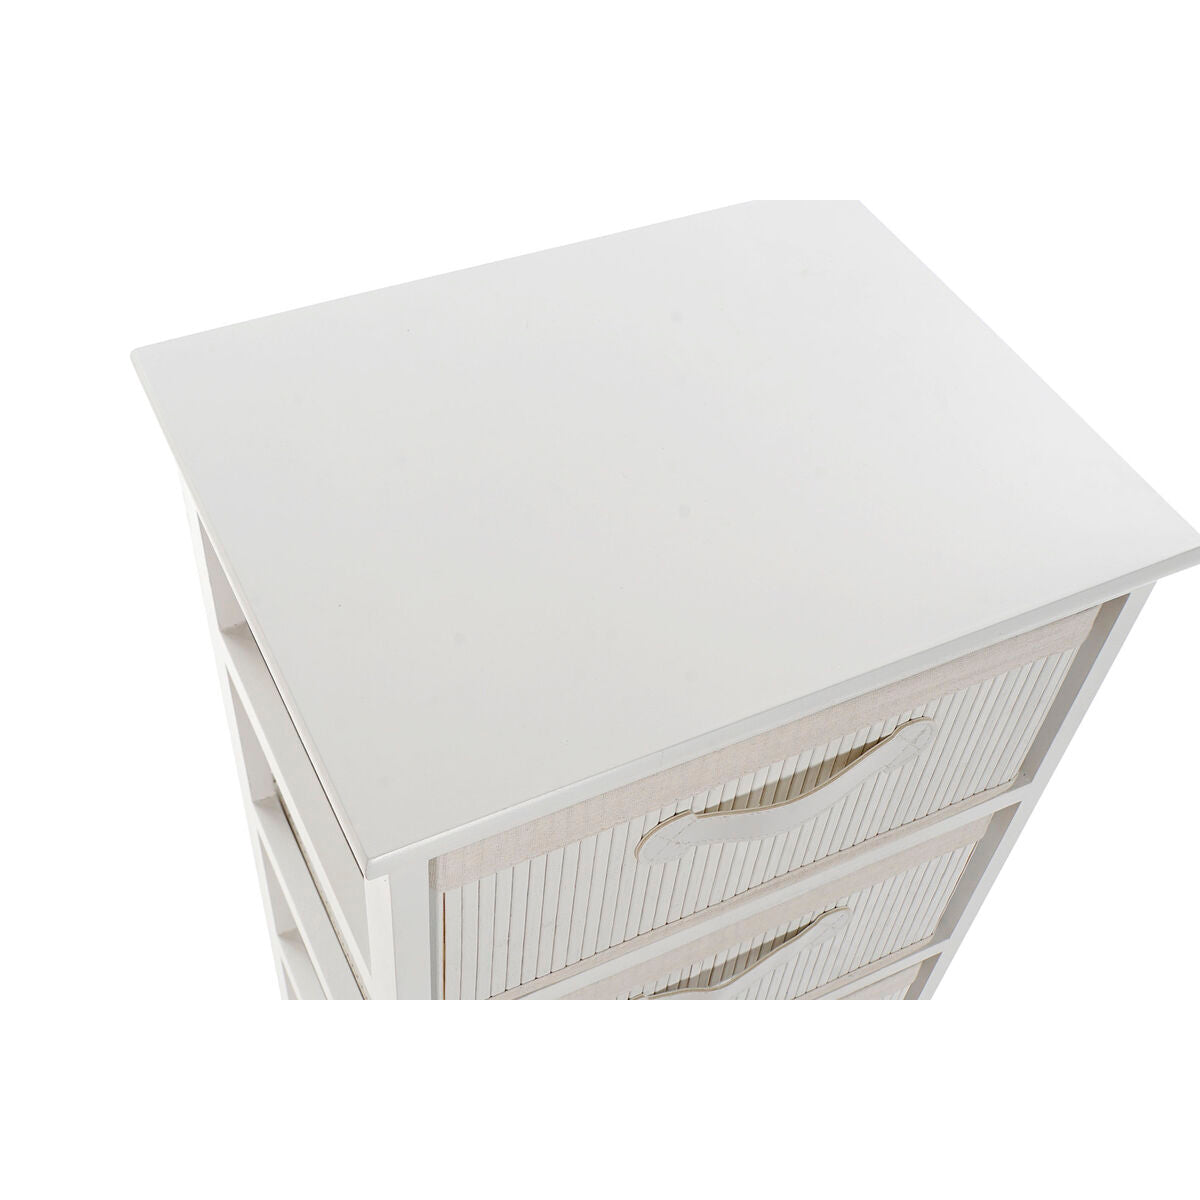 White Chest of drawers in Wood and Bamboo (42 x 32 x 81 cm)